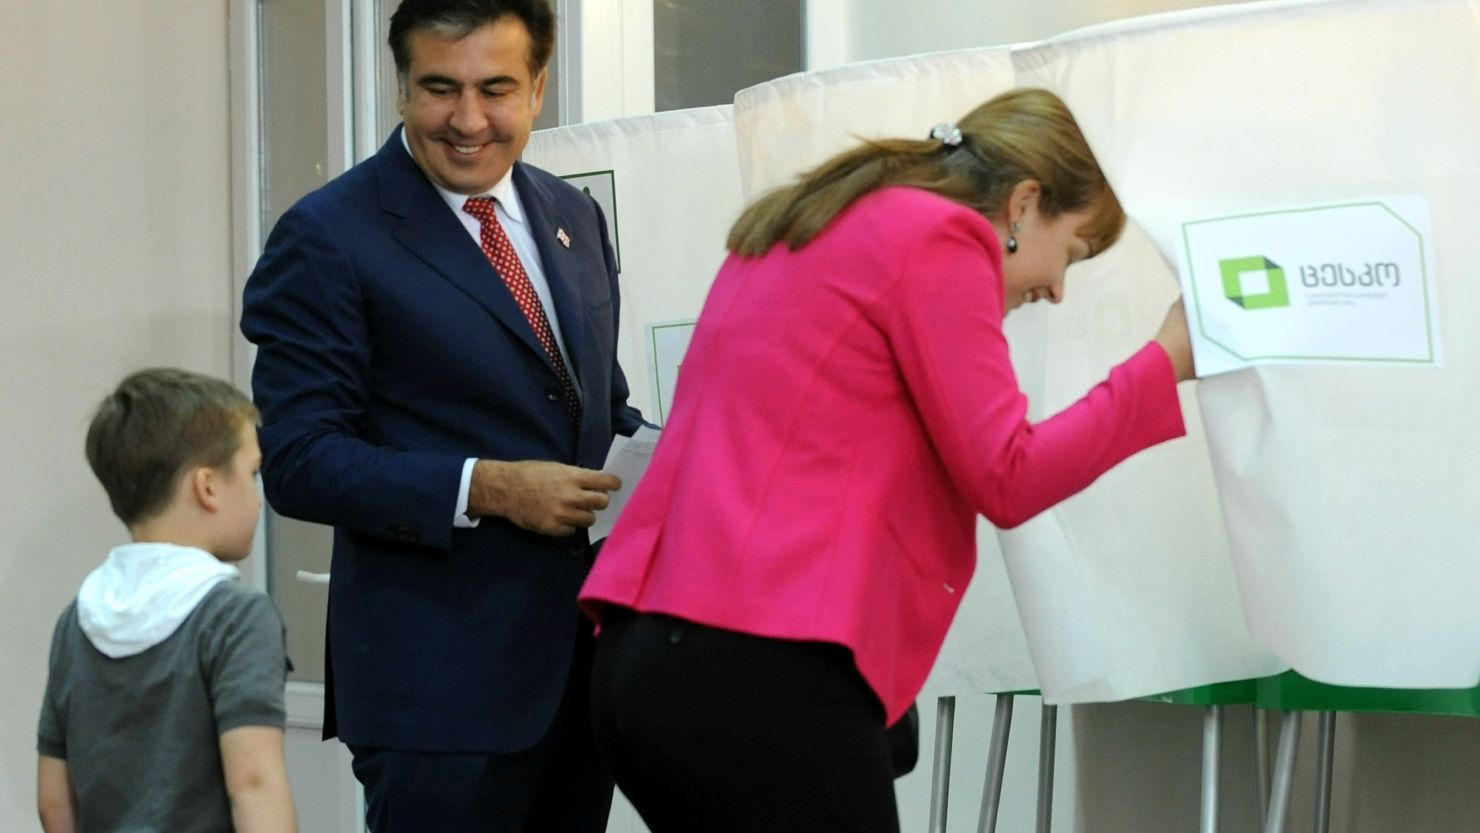 President Mikheil Saakashvili and his wife Sandra Roelofs cast their votes at a polling station in Tbilisi on October 1, 2012.